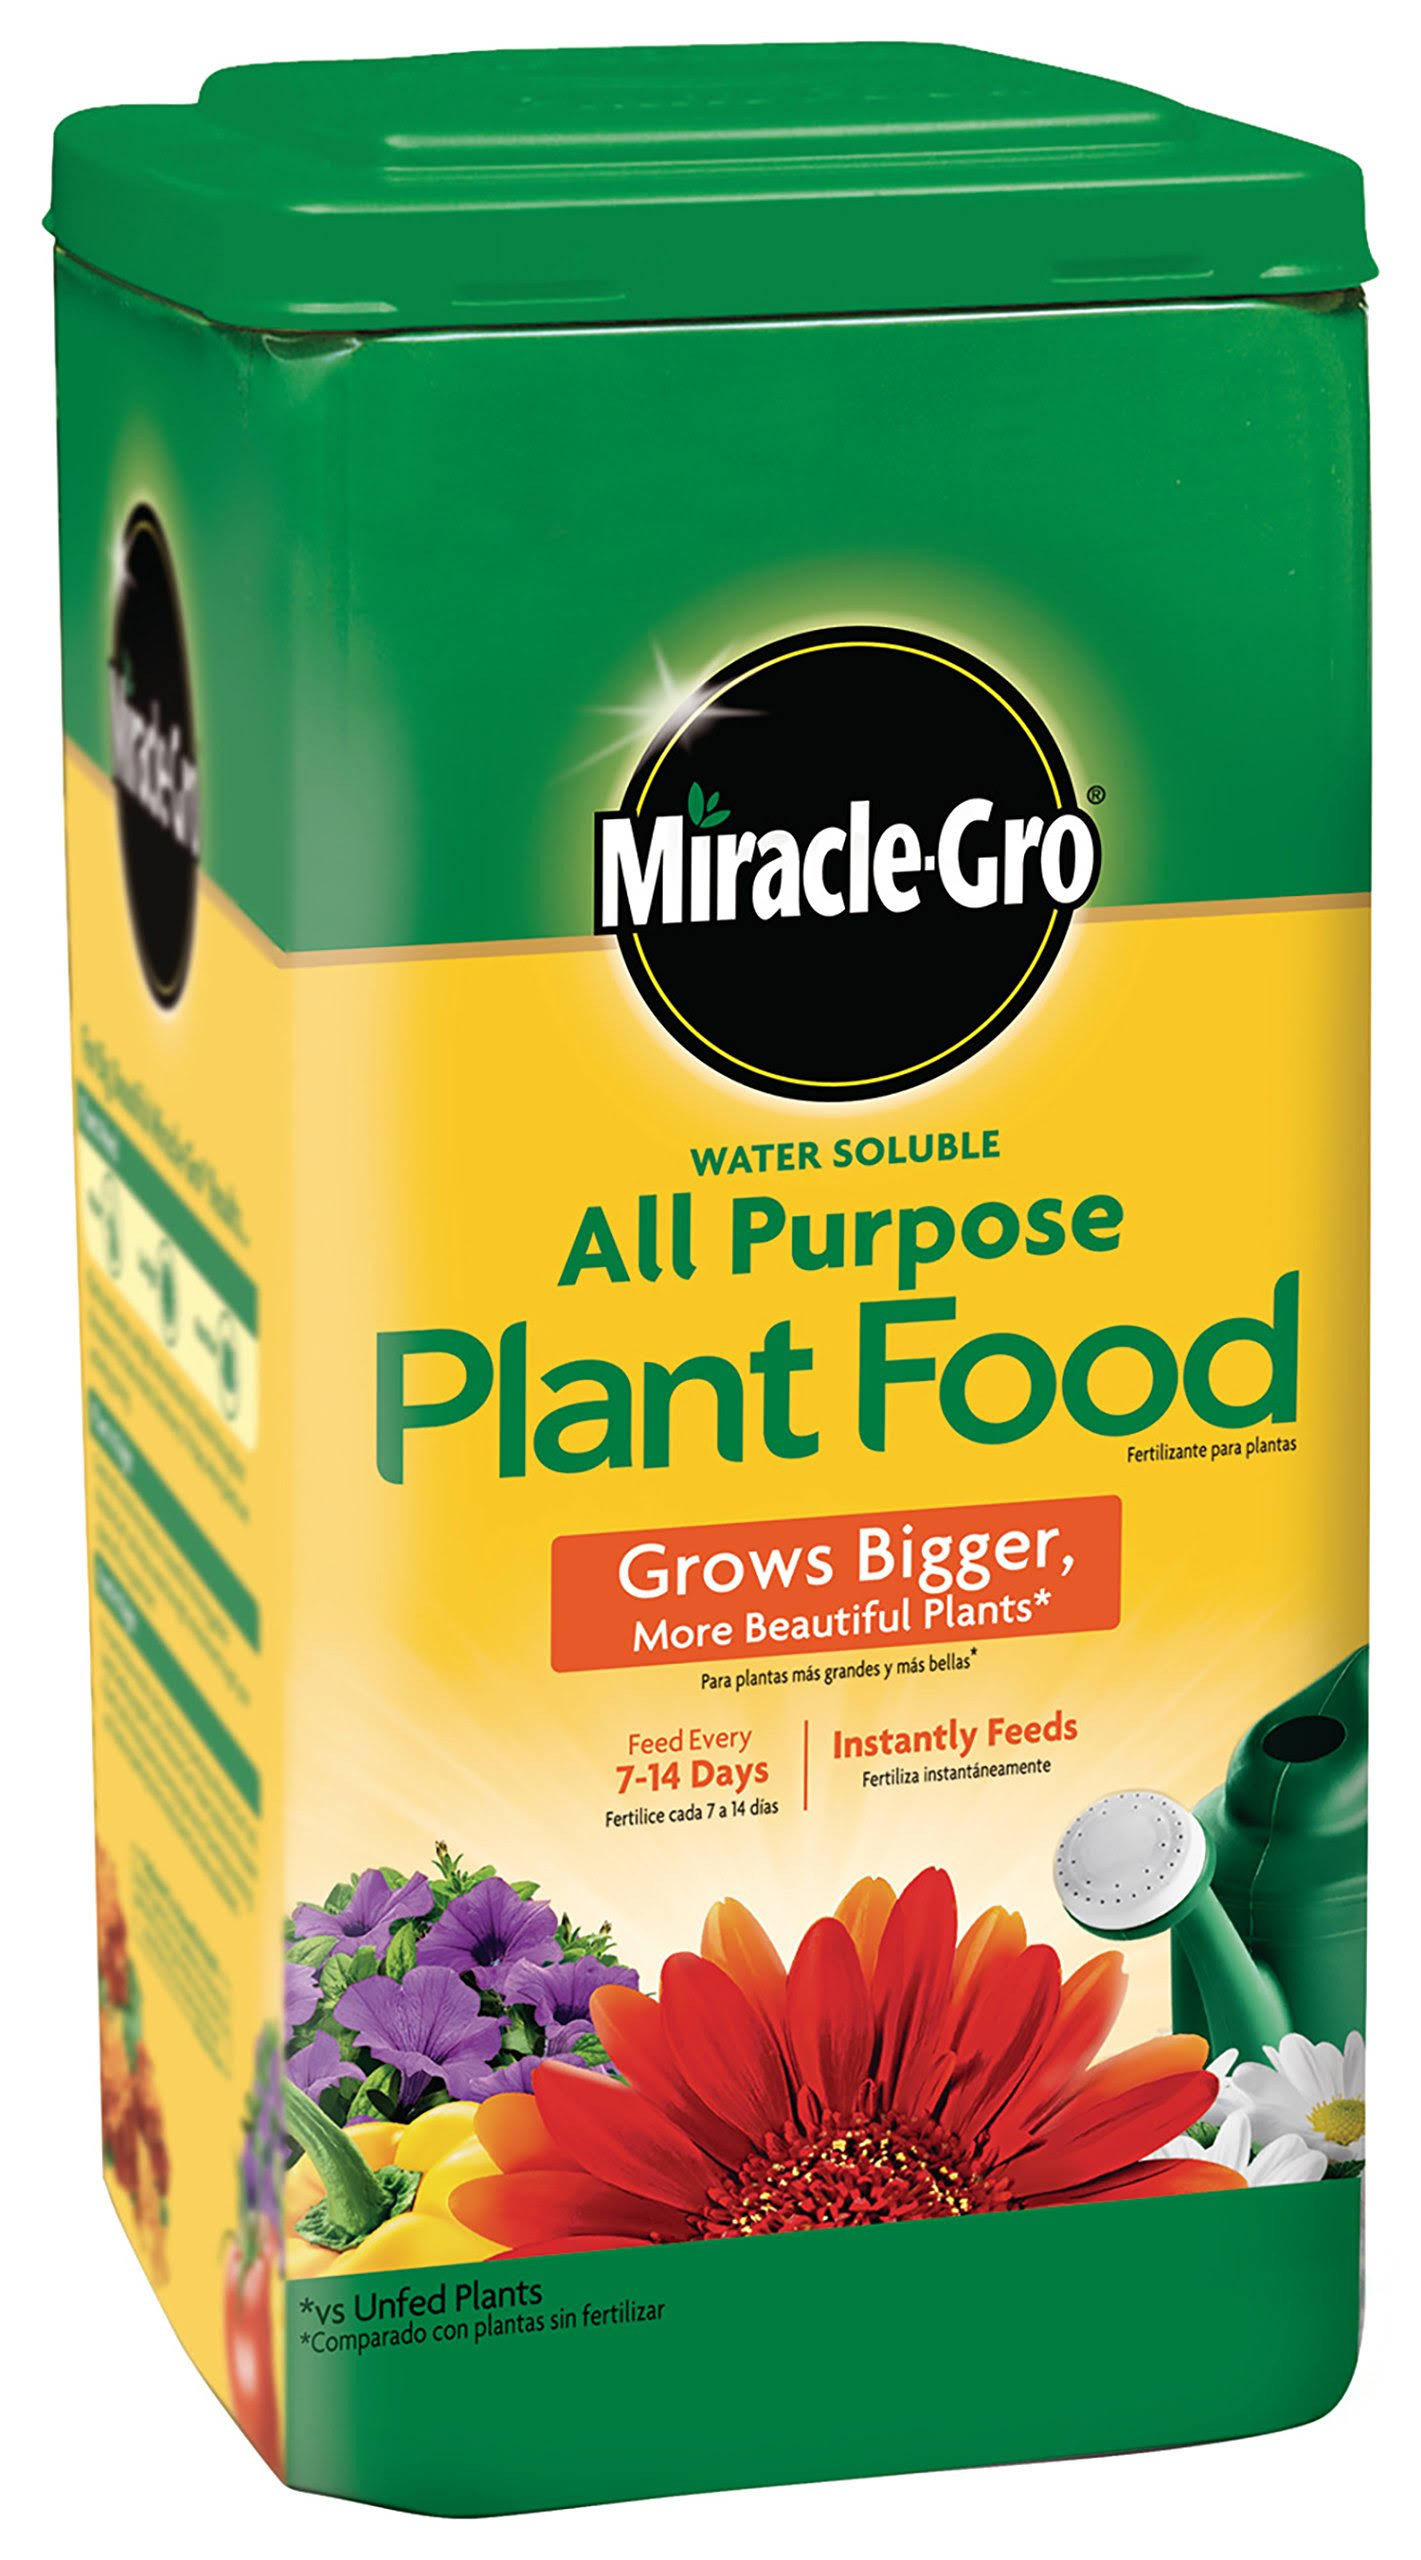 Miracle Gro Customer Service Number